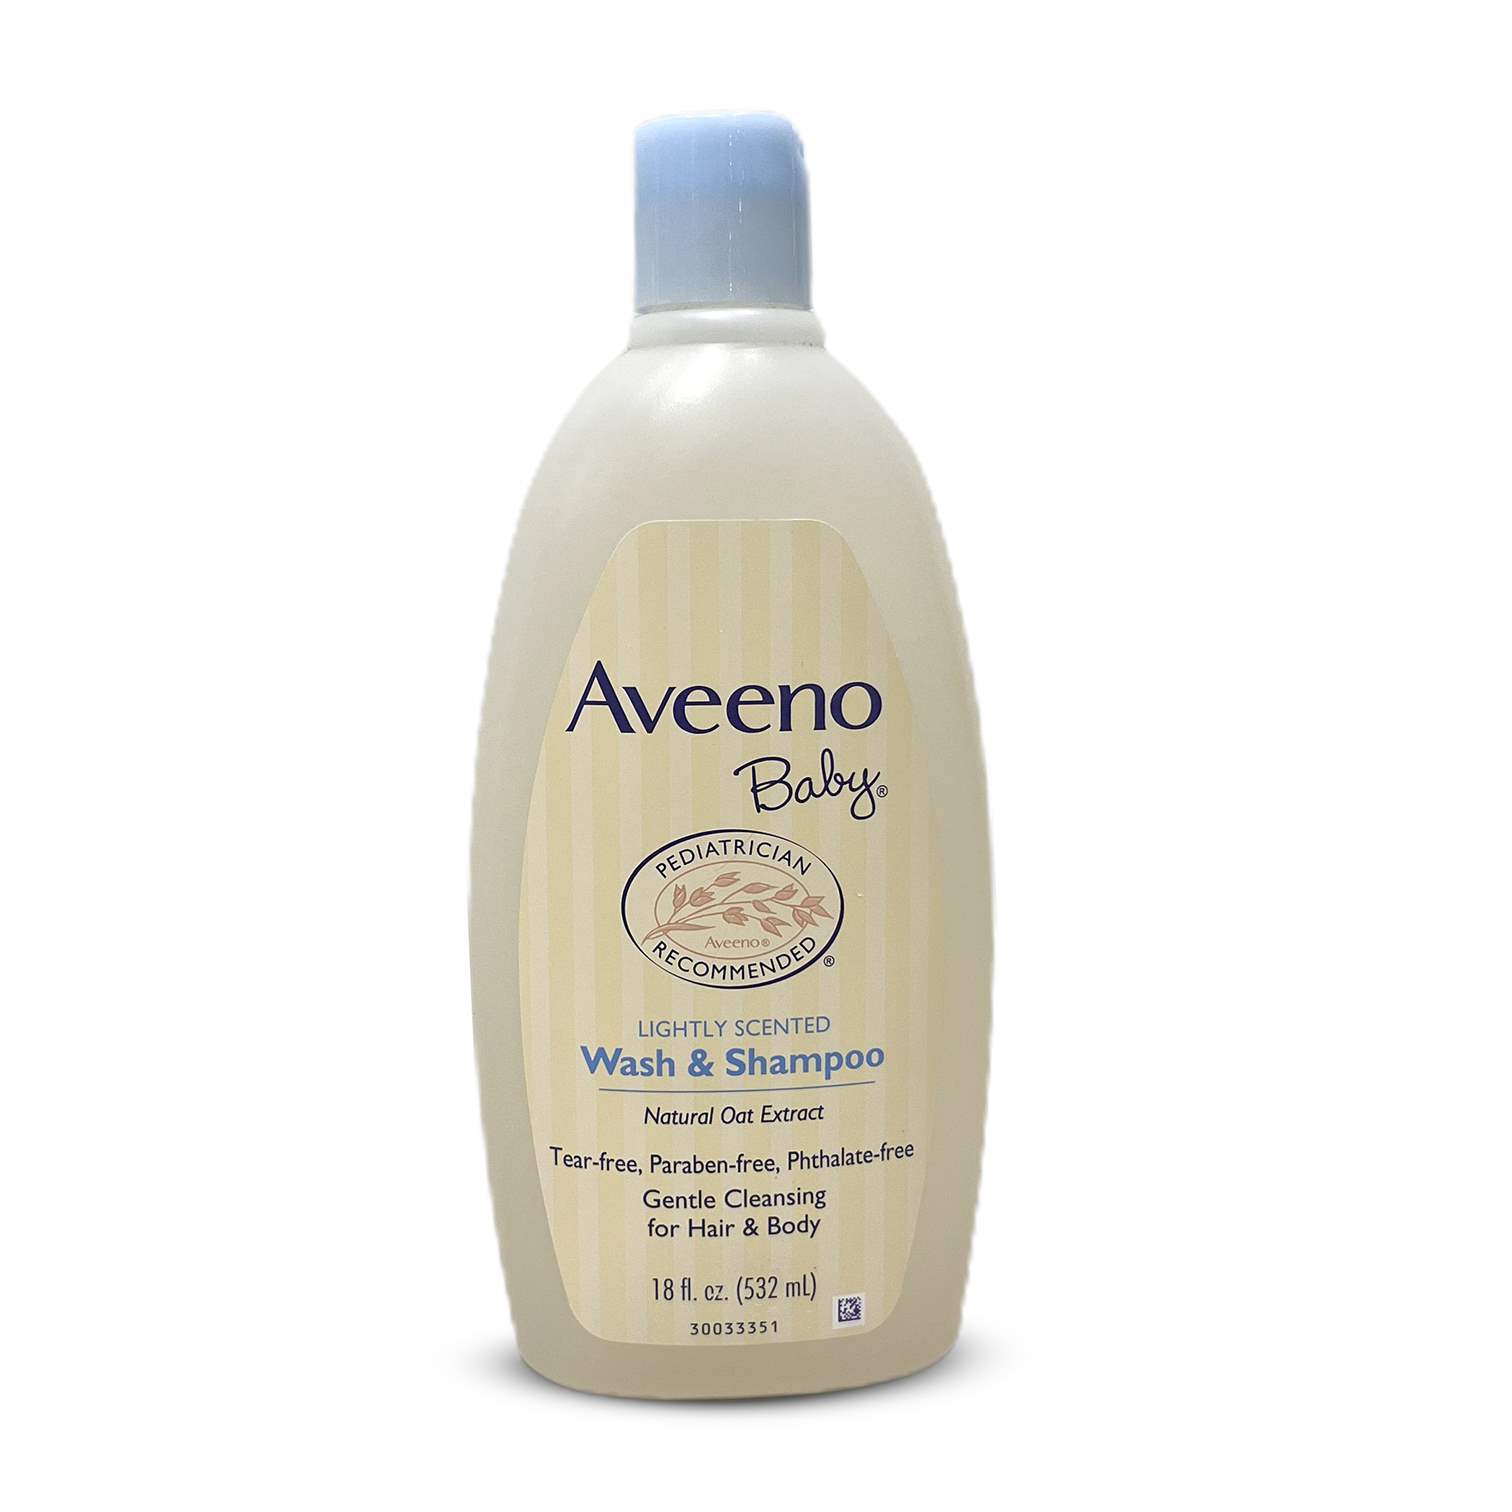 Aveeno Baby Wash & Shampoo with Natural Oat Extract, Lightly Scented - 532ml